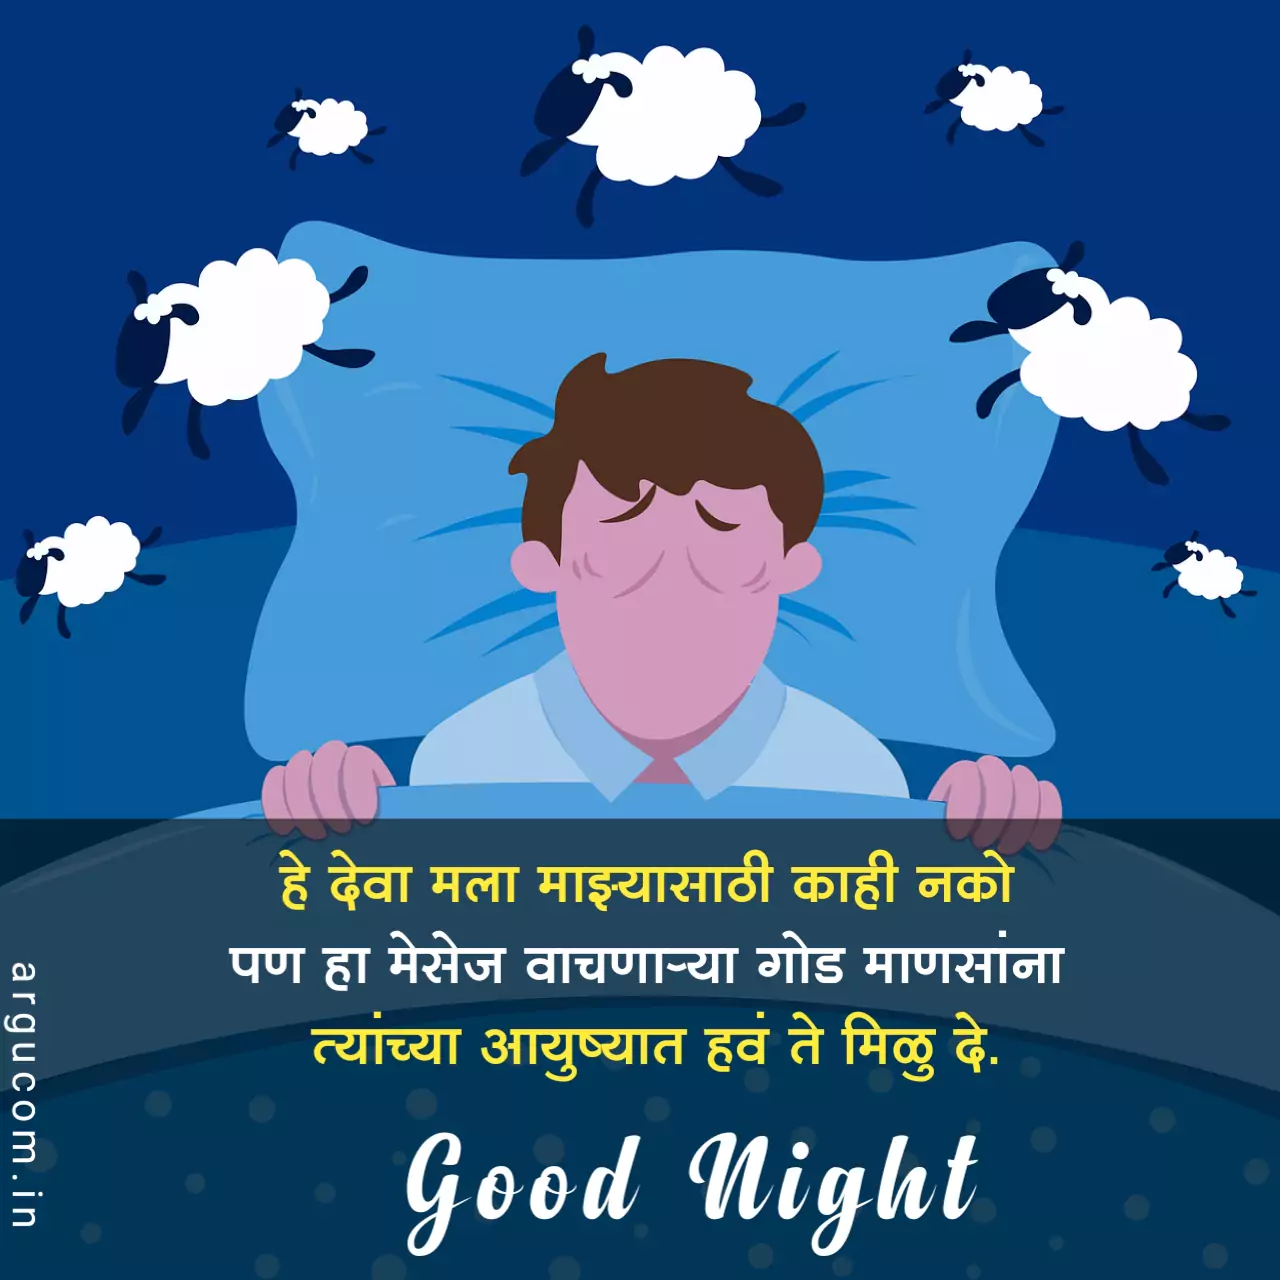 Good Night messages In Marathi